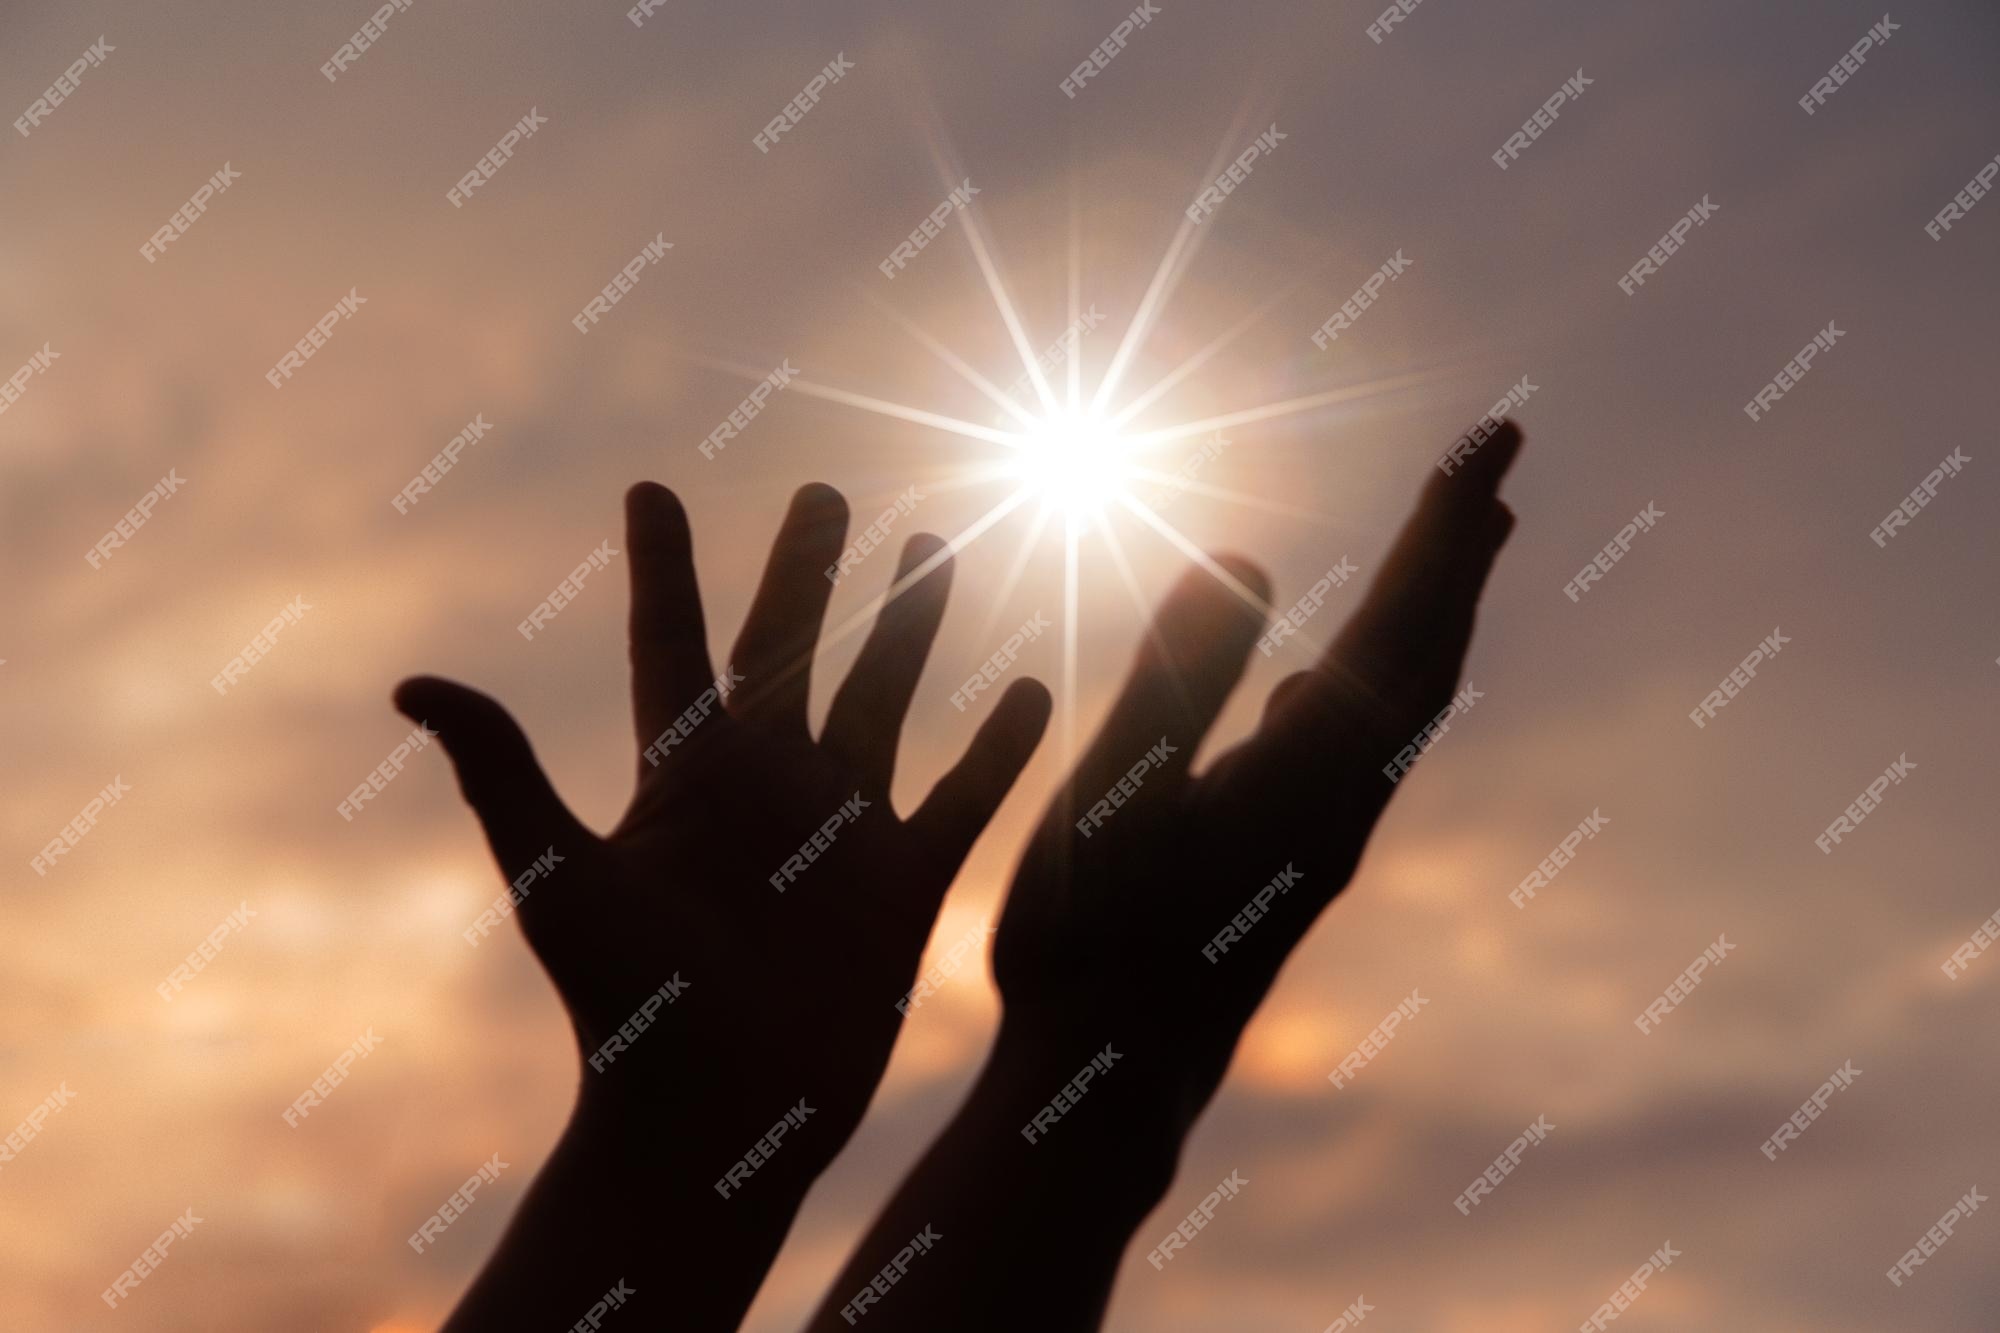 Premium Photo | Person human hands open palm up worship or pray for god  background is sunrise concept for christian christianity catholic religion  divine heavenly celestial or god